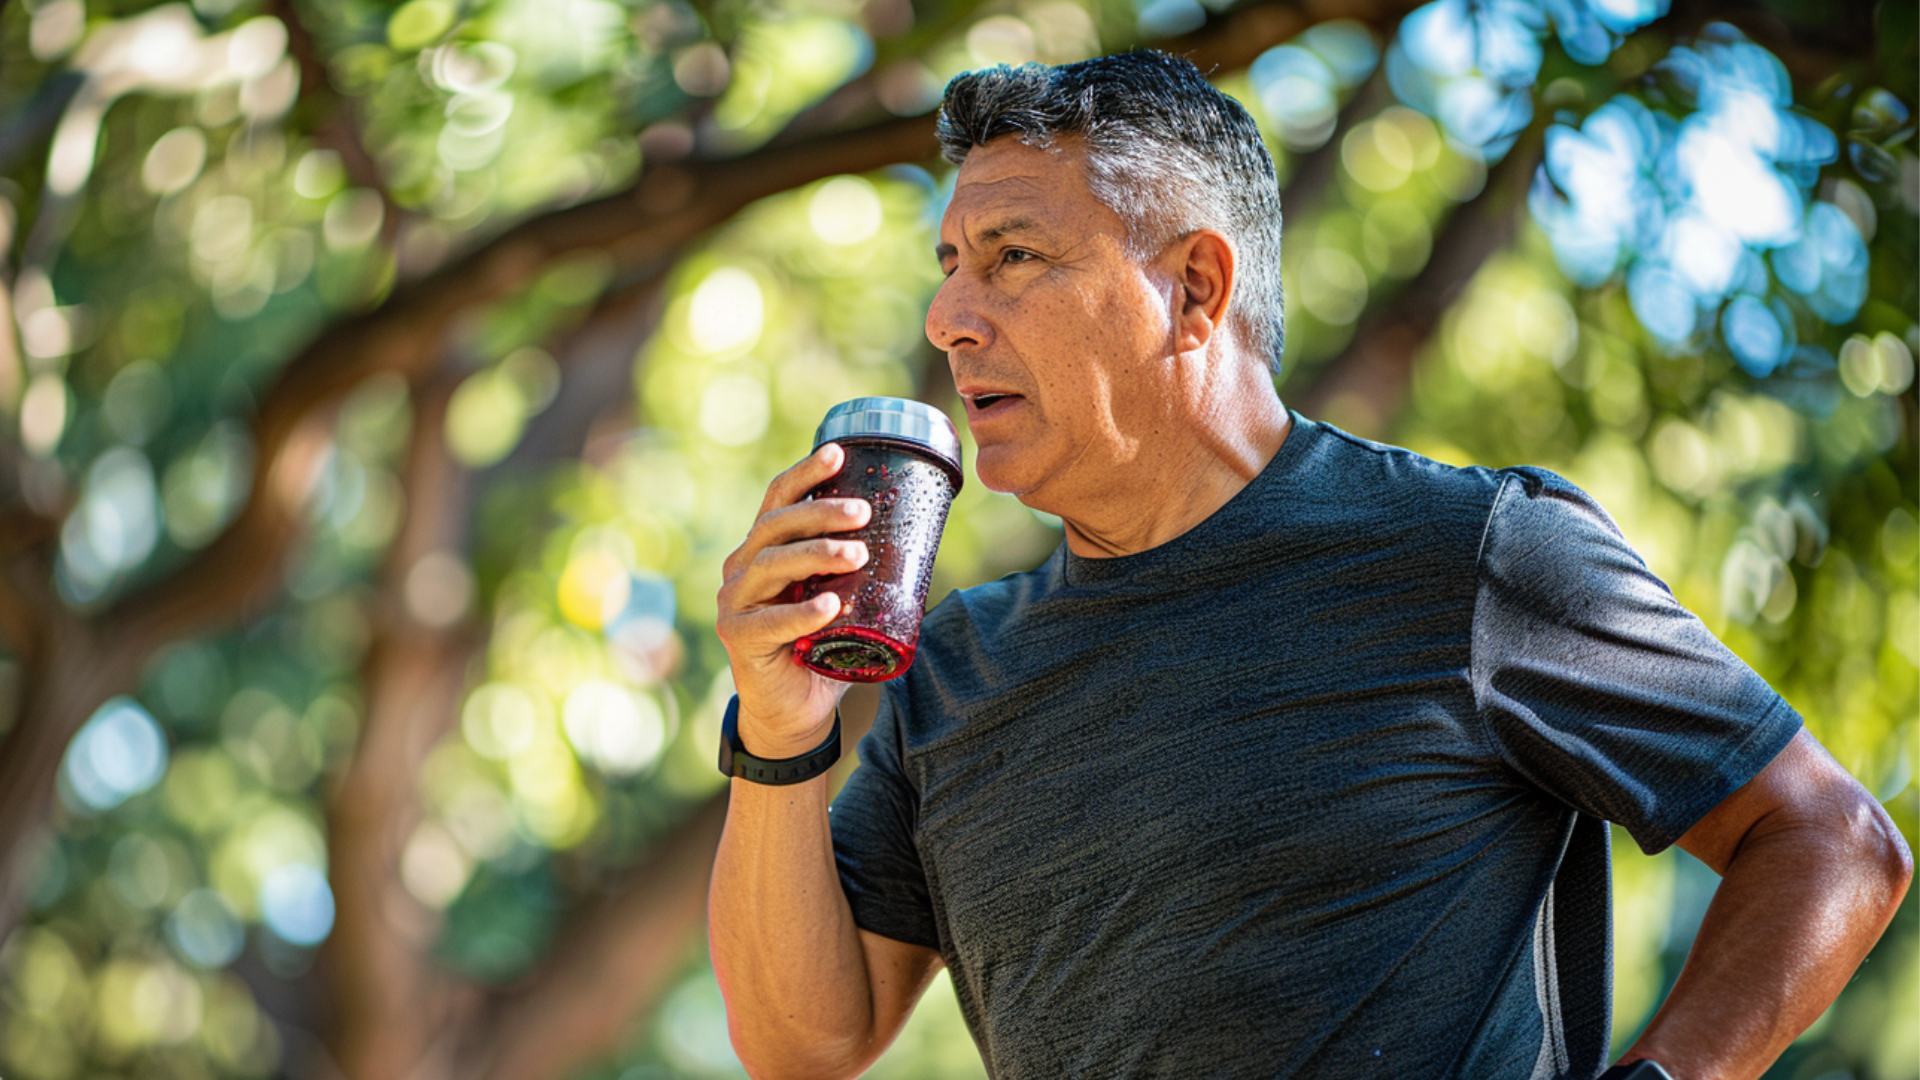 a hispanic man mid 50-60 year old drinking from a work-out tumbler, wearing fitness watch, running position, outdoor park